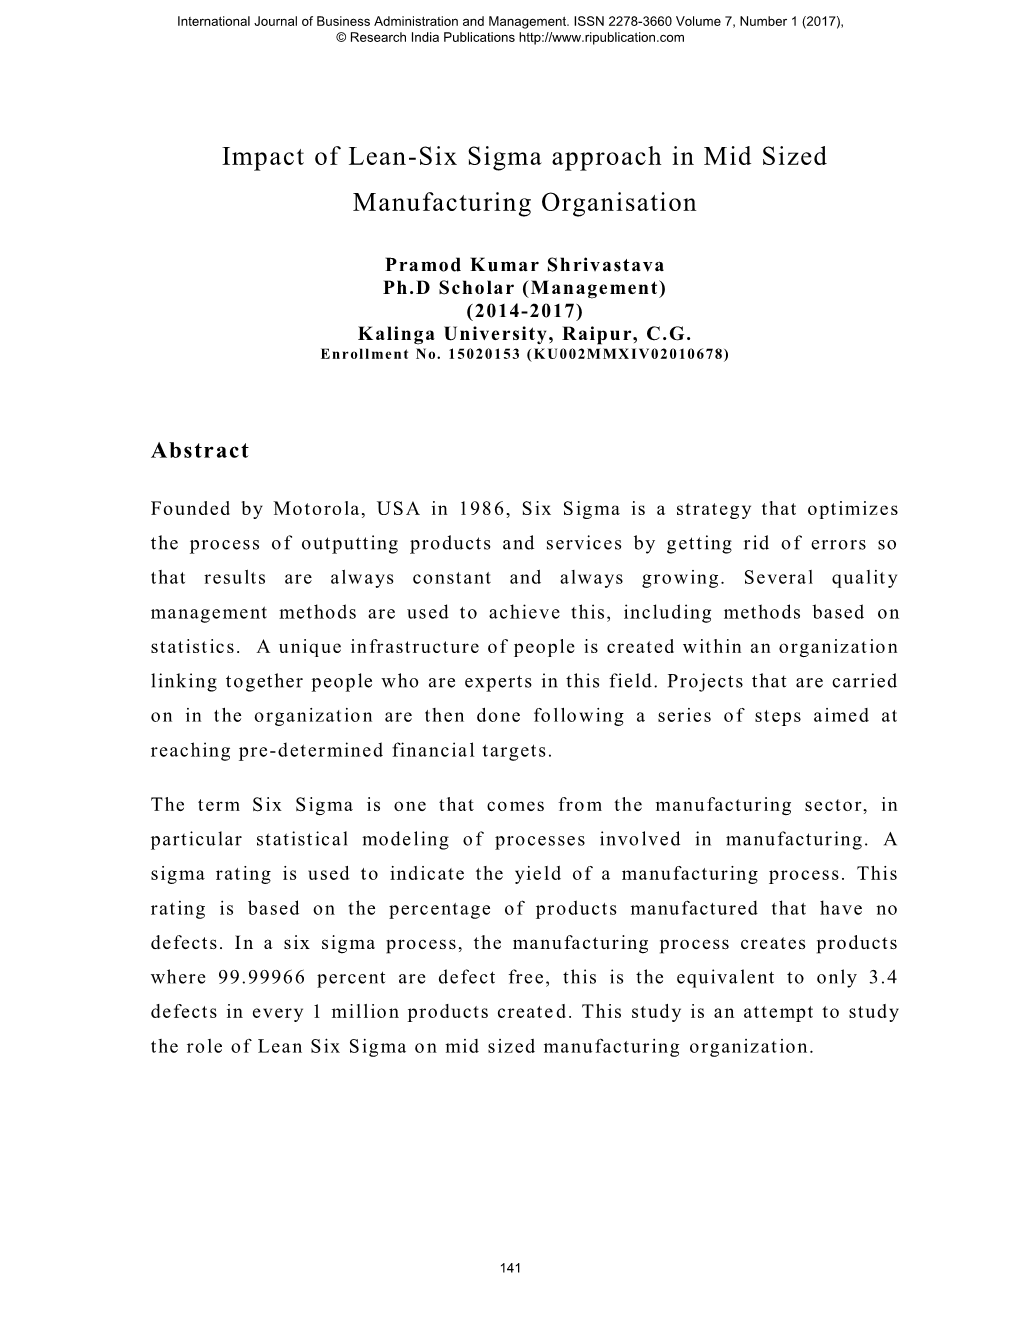 Impact of Lean-Six Sigma Approach in Mid Sized Manufacturing Organisation